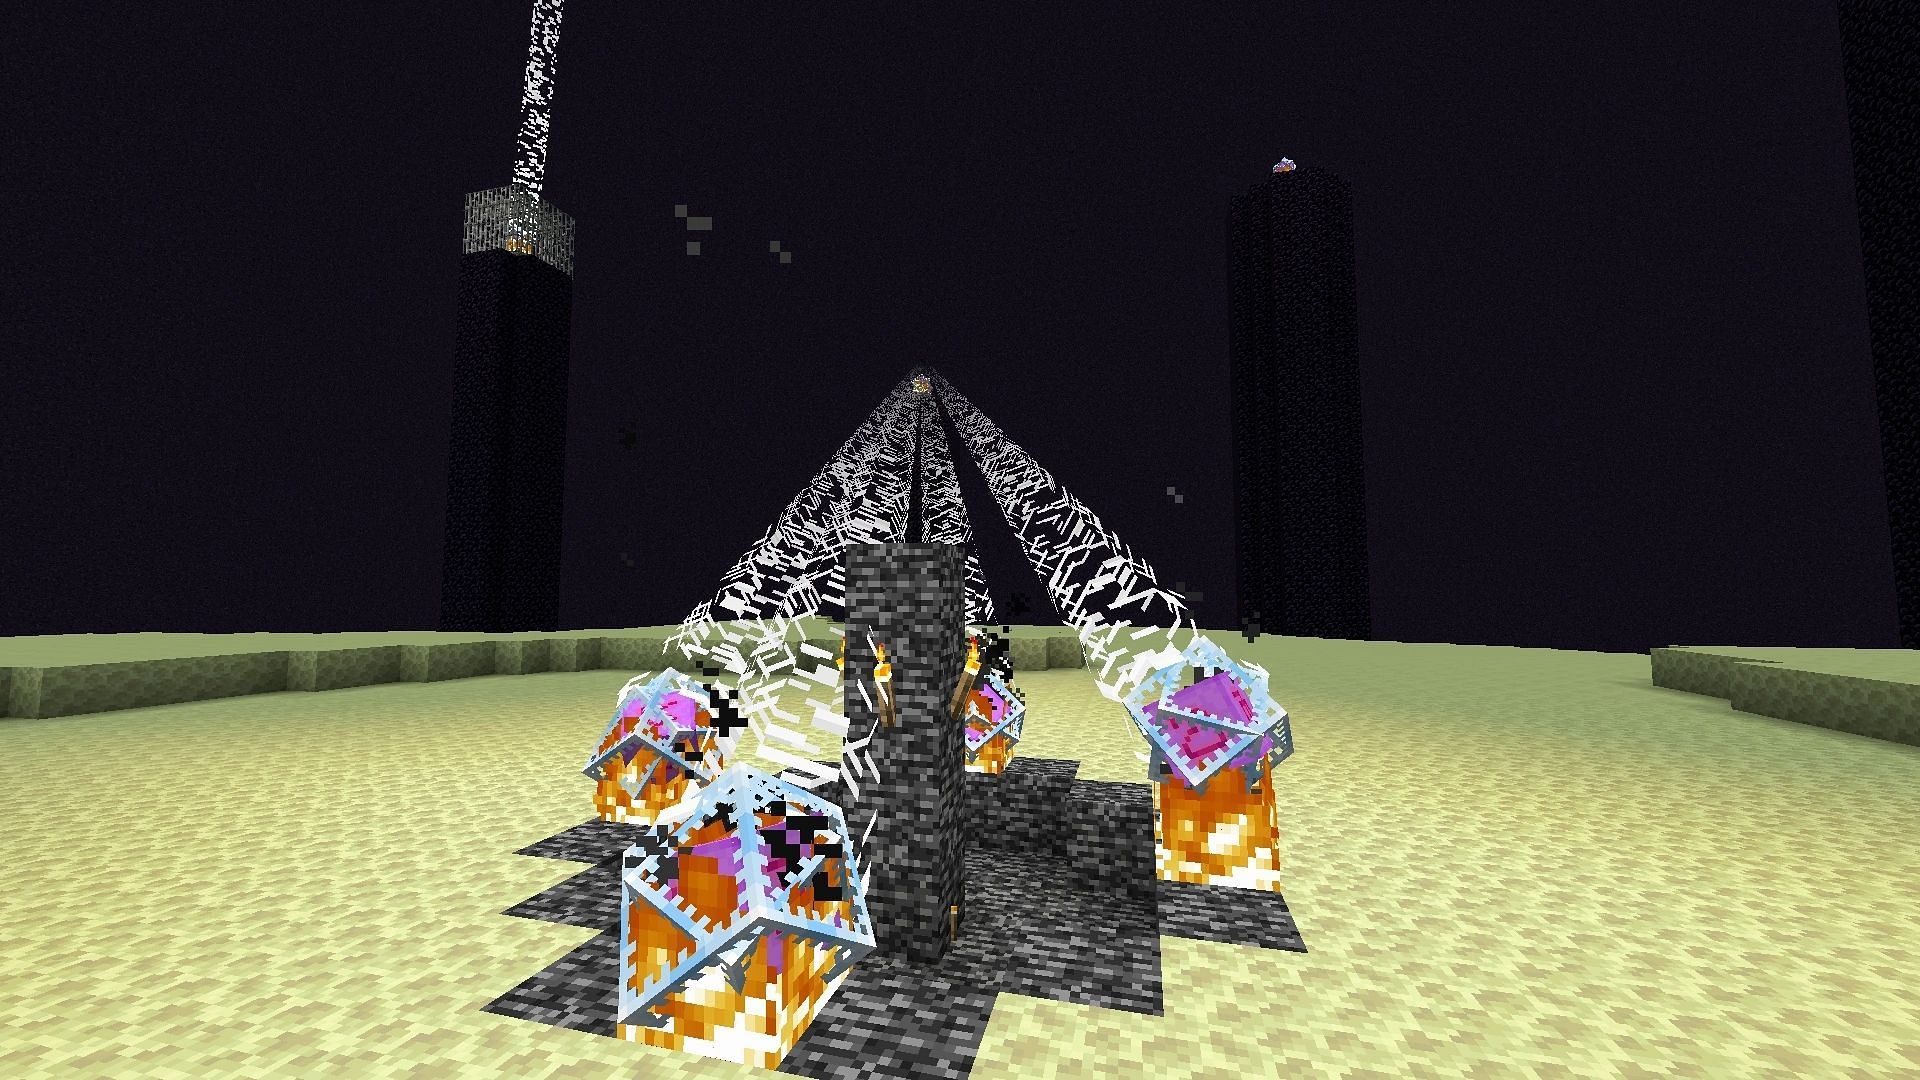 End crystals can respawn the Ender Dragon in Minecraft 1.19 (Image via Minecraft Wiki)